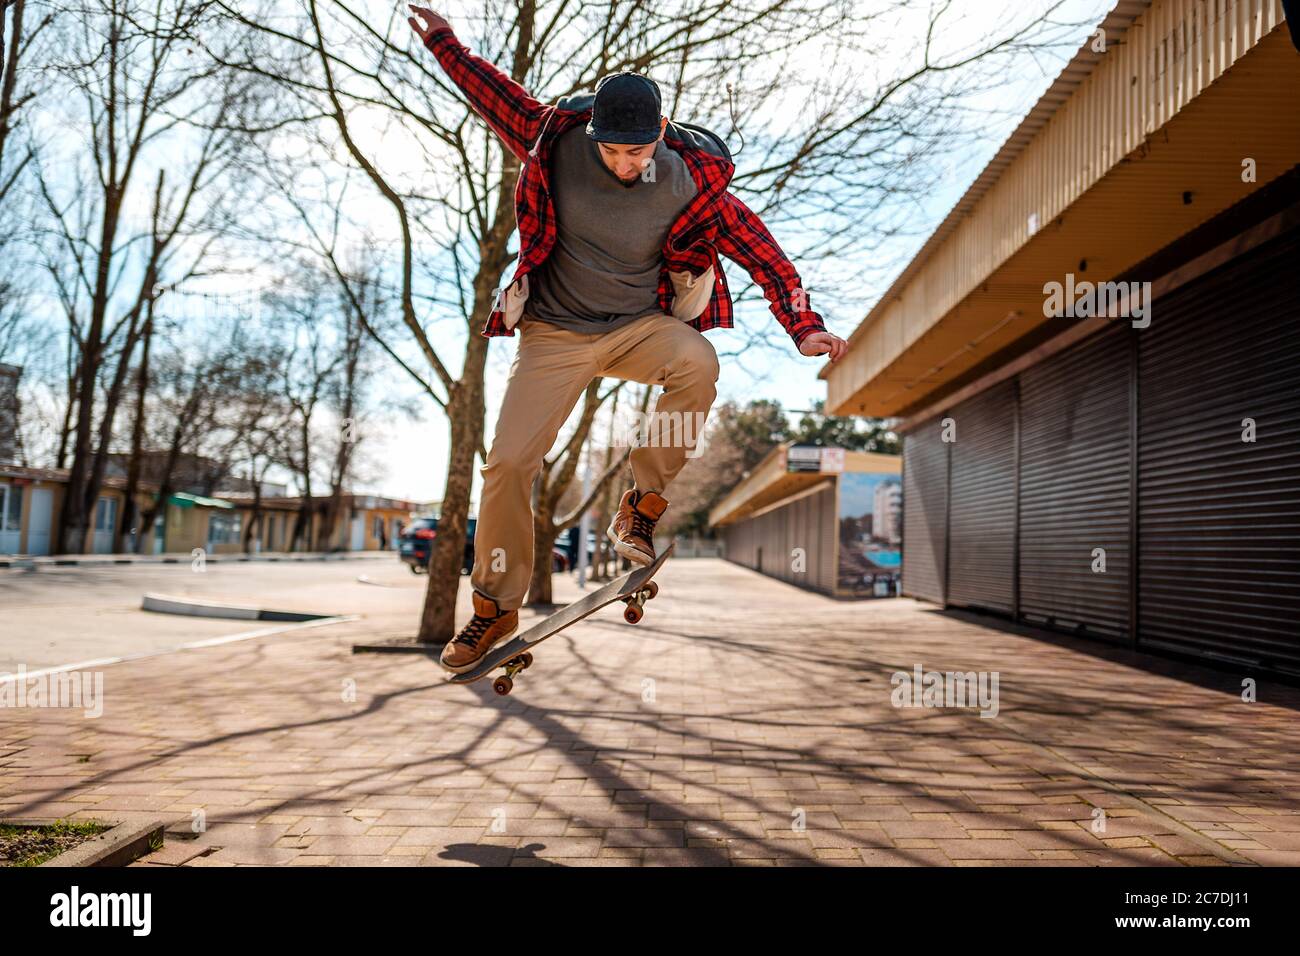 A young hipster male makes a jump with a skateboard, kickflip, or Ollie. Copy space. Concept of active lifestyle and street culture. Stock Photo